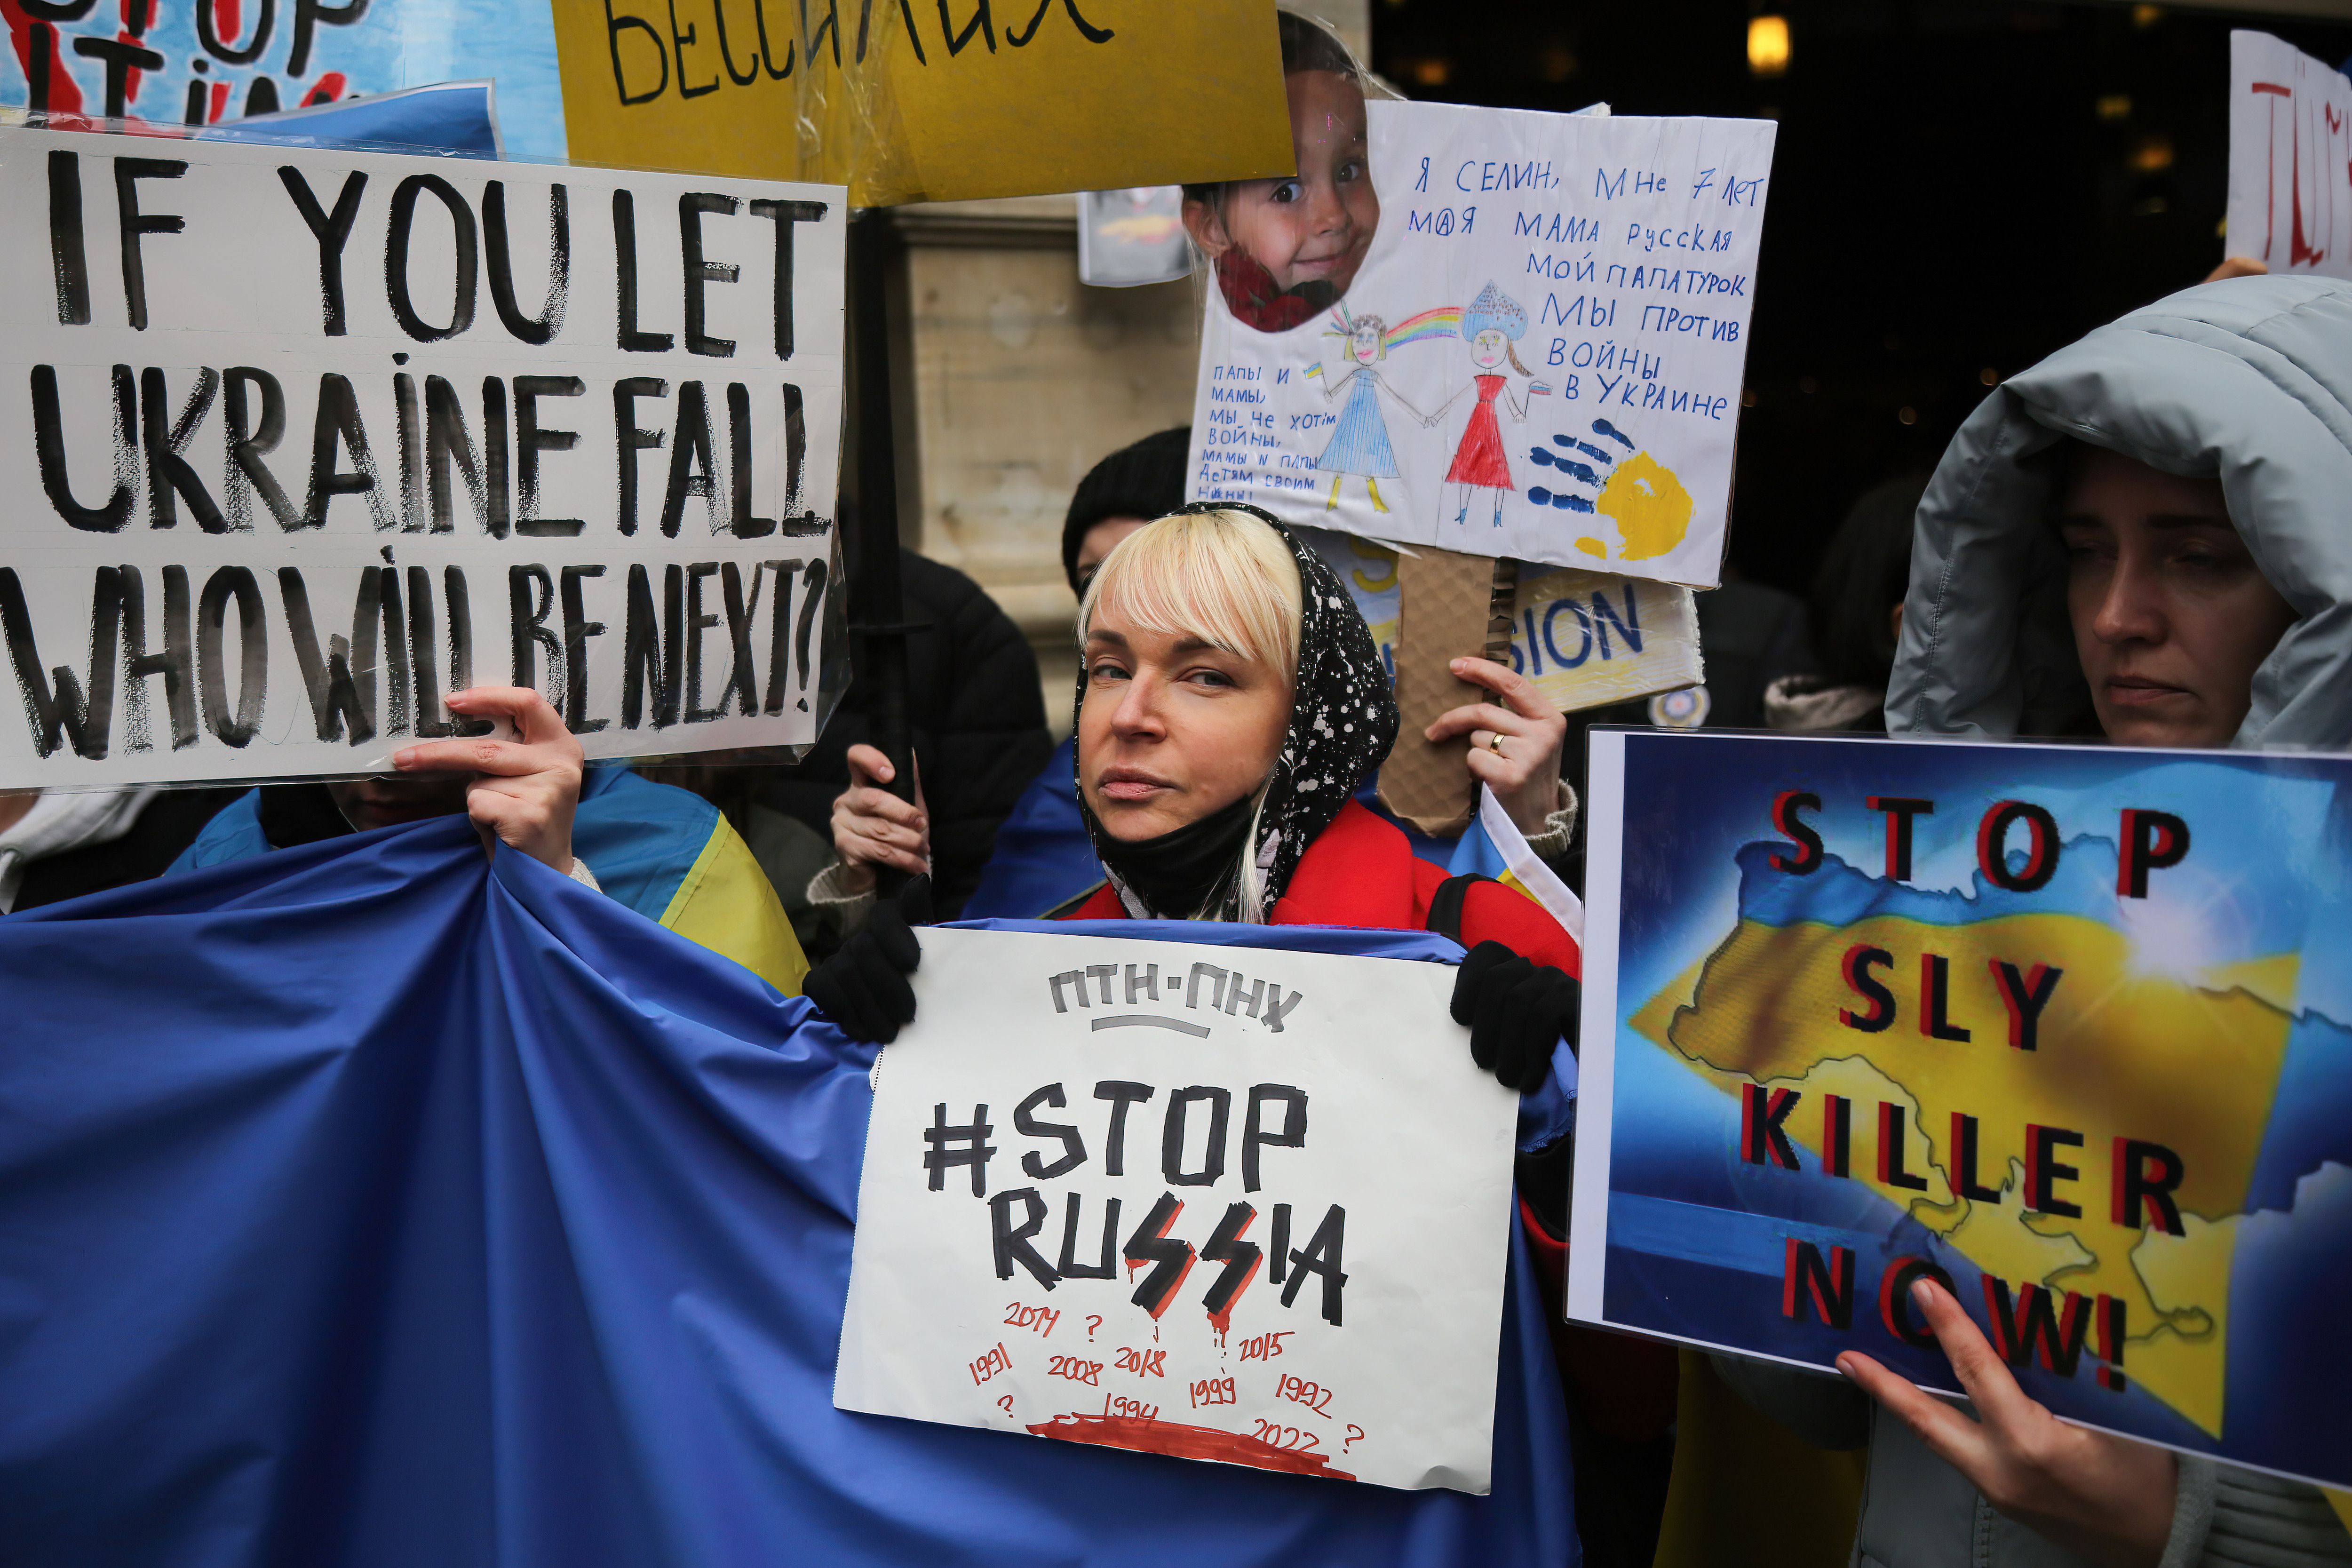 Photo of people holding signs that say "#StopRussia" and "If you let Ukraine fall, who will be next?"